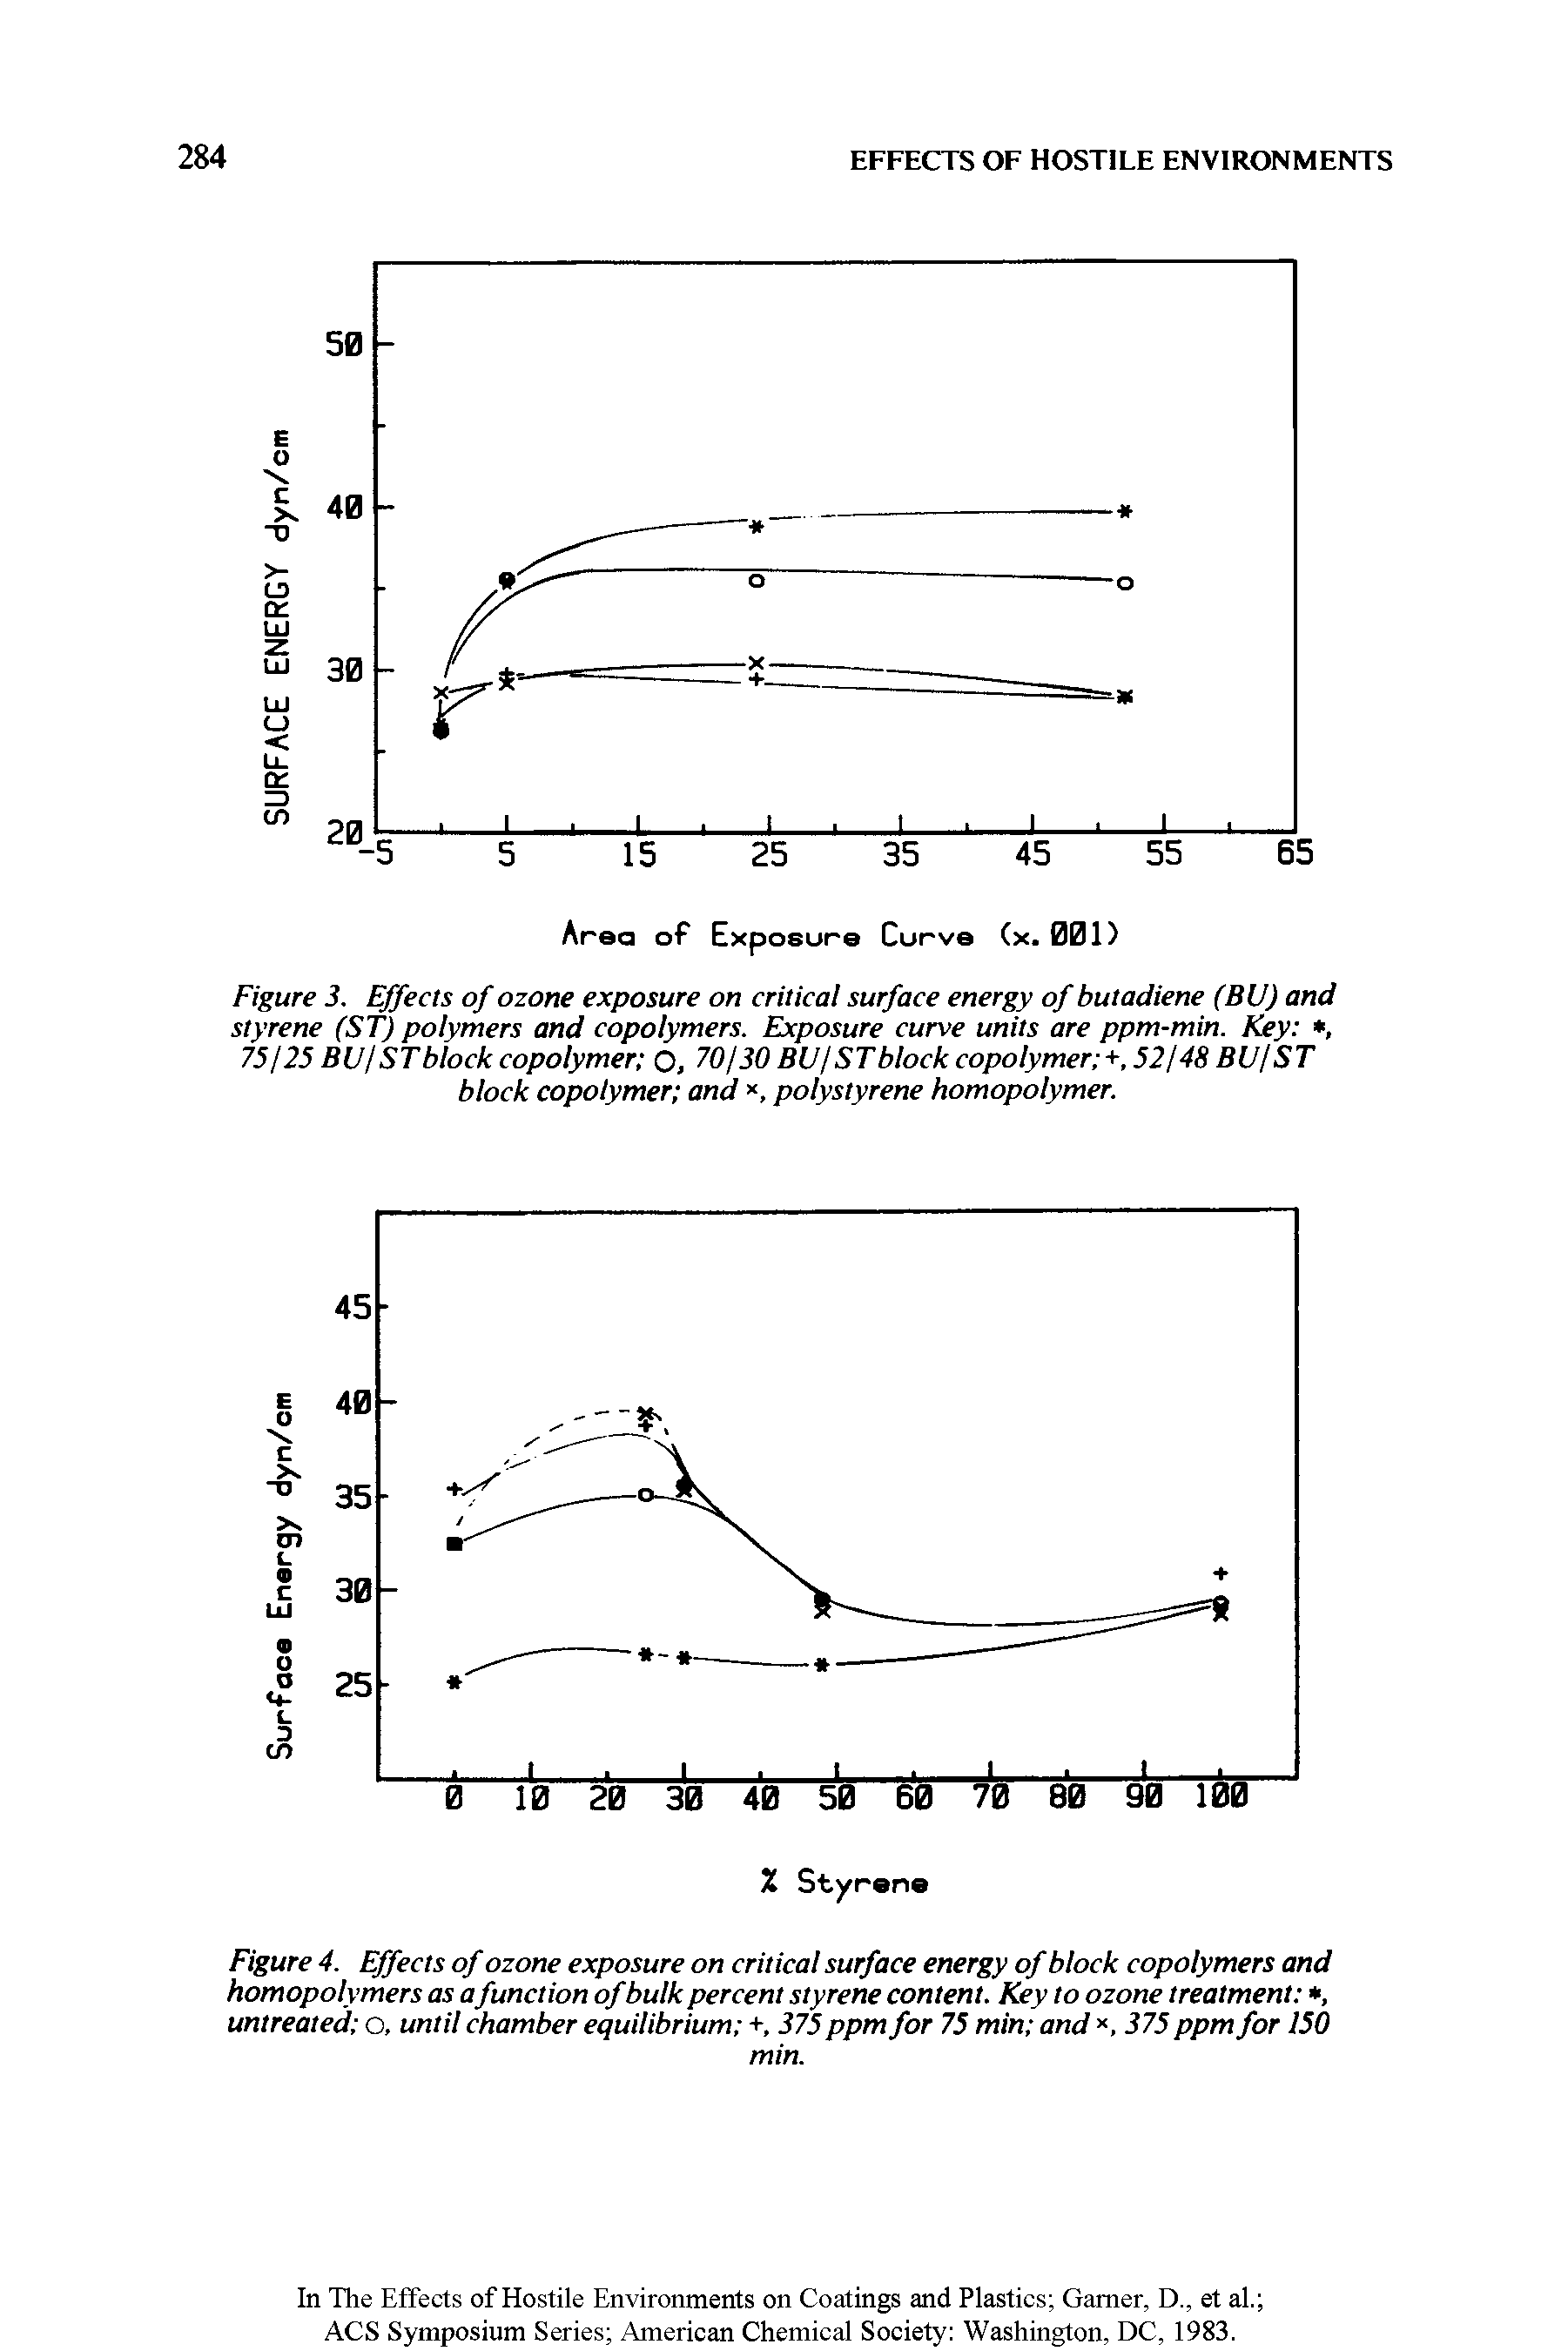 Figure 3, Effects of ozone exposure on critical surface energy of butadiene (BUj and styrene (ST) polymers and copolymers. Exposure curve units are ppm-min. Key , 75/25 BU/ST block copolymer O, 70/30 BU/ ST block copolymer +, 52/48 BU/ST...